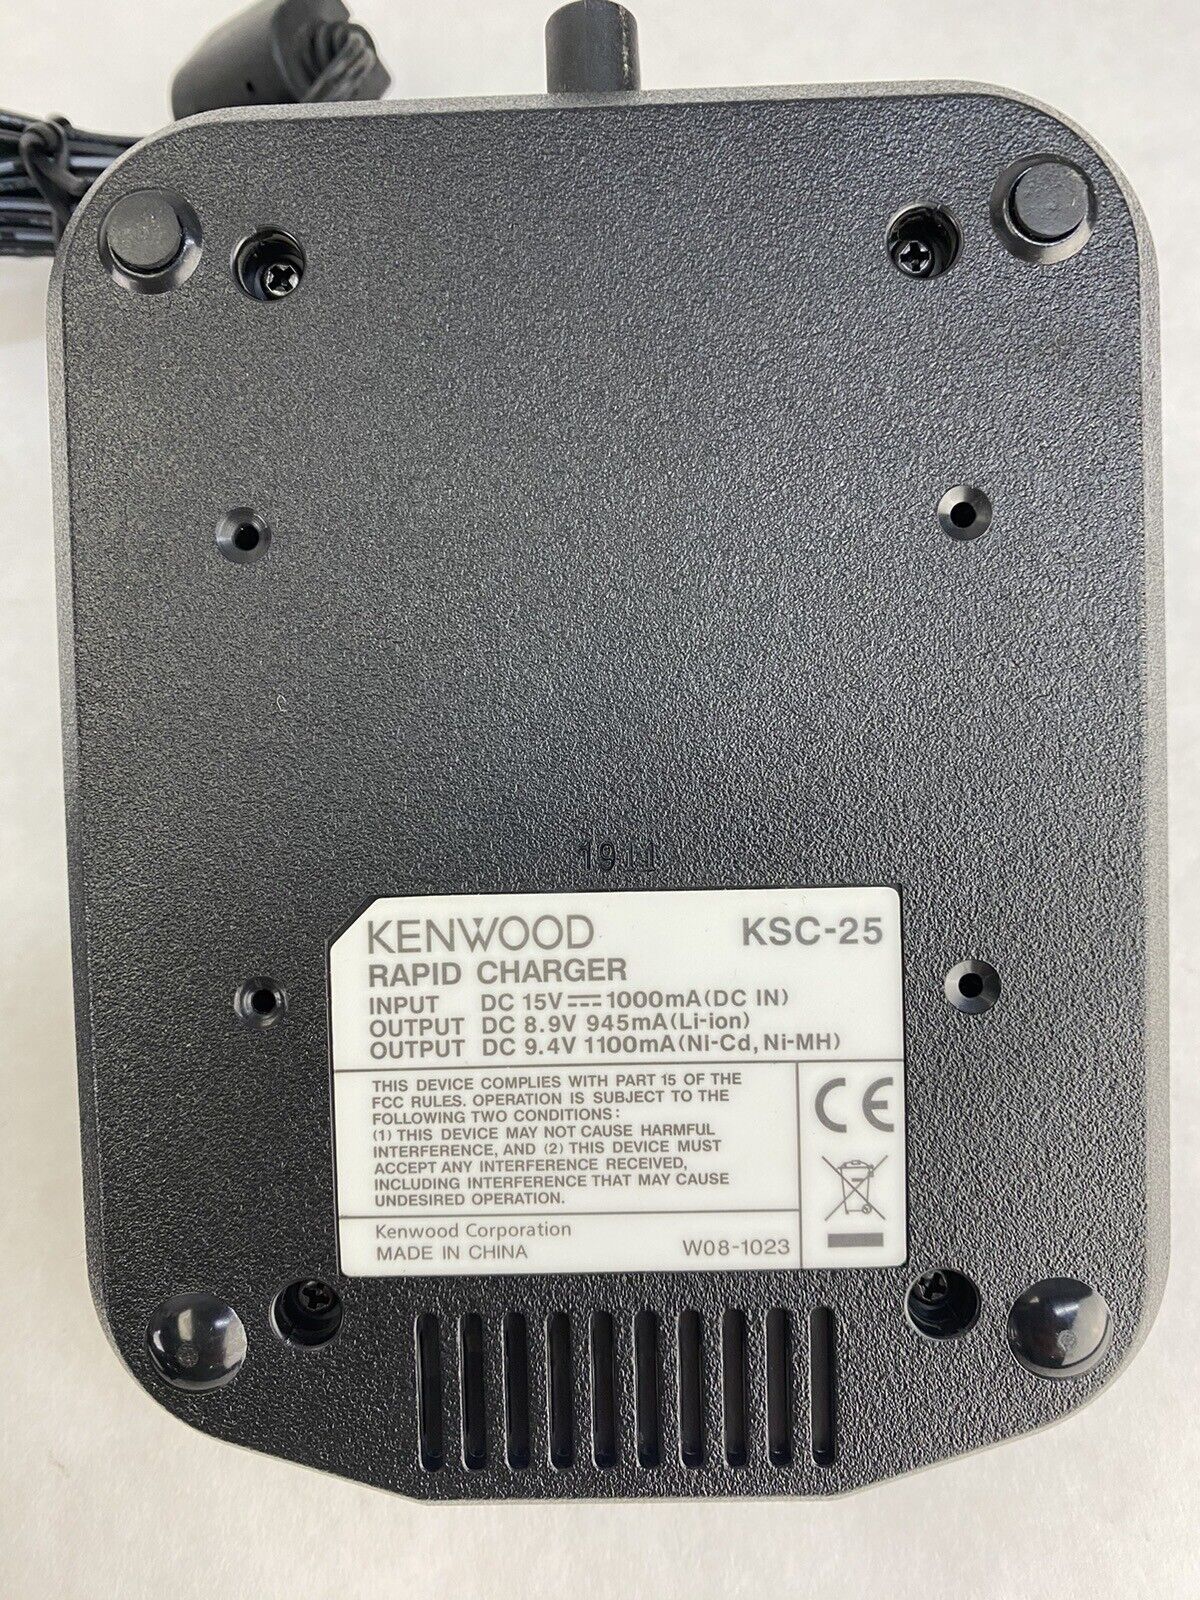 6 Kenwood KSC-25 Charging Cradles with KMB-23 Stand Multiple Charger